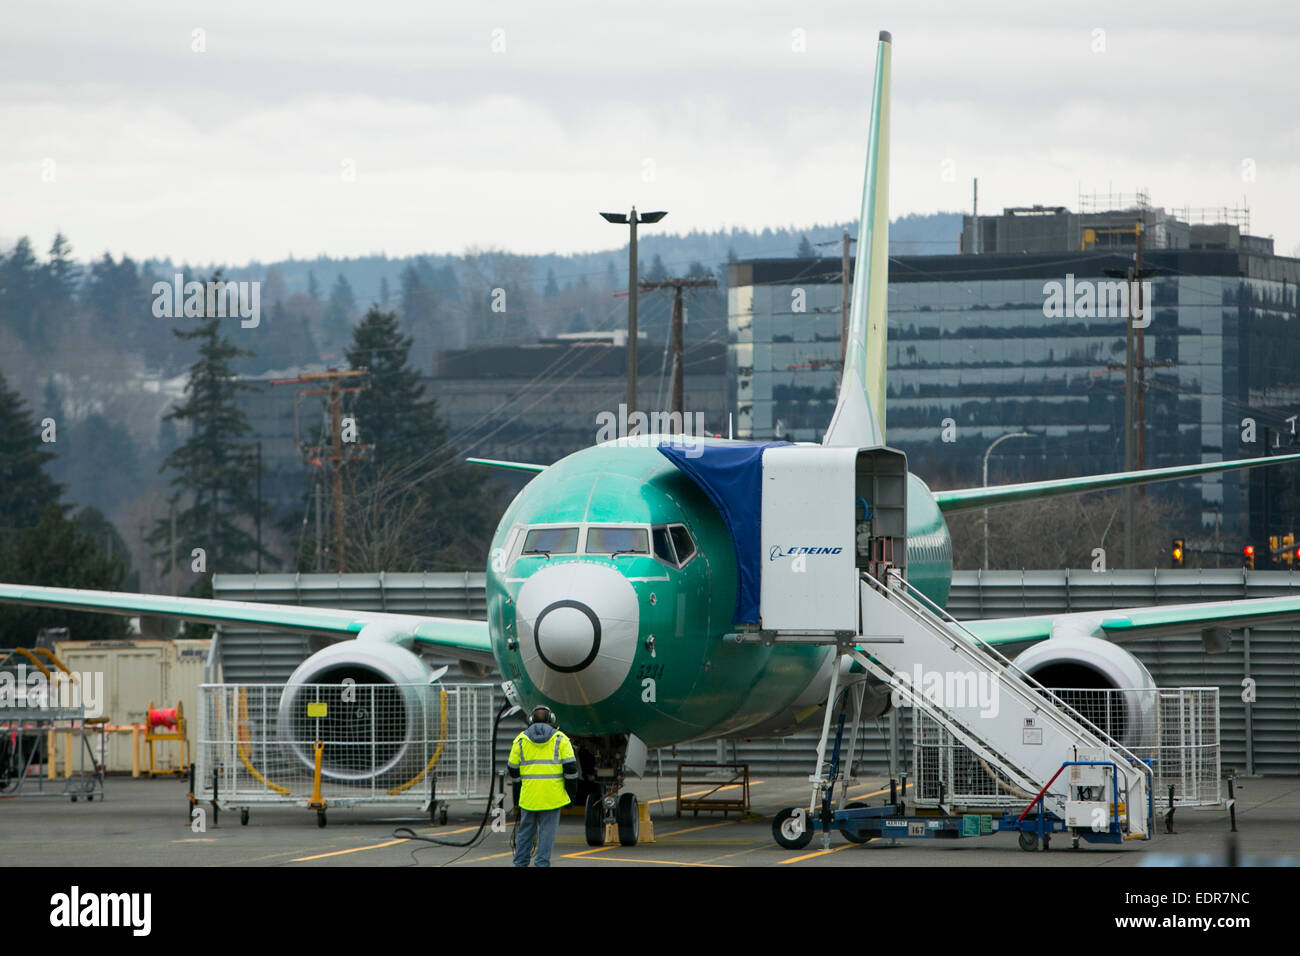 Boeing Factory Stock Photos & Boeing Factory Stock Images - Alamy1300 x 956